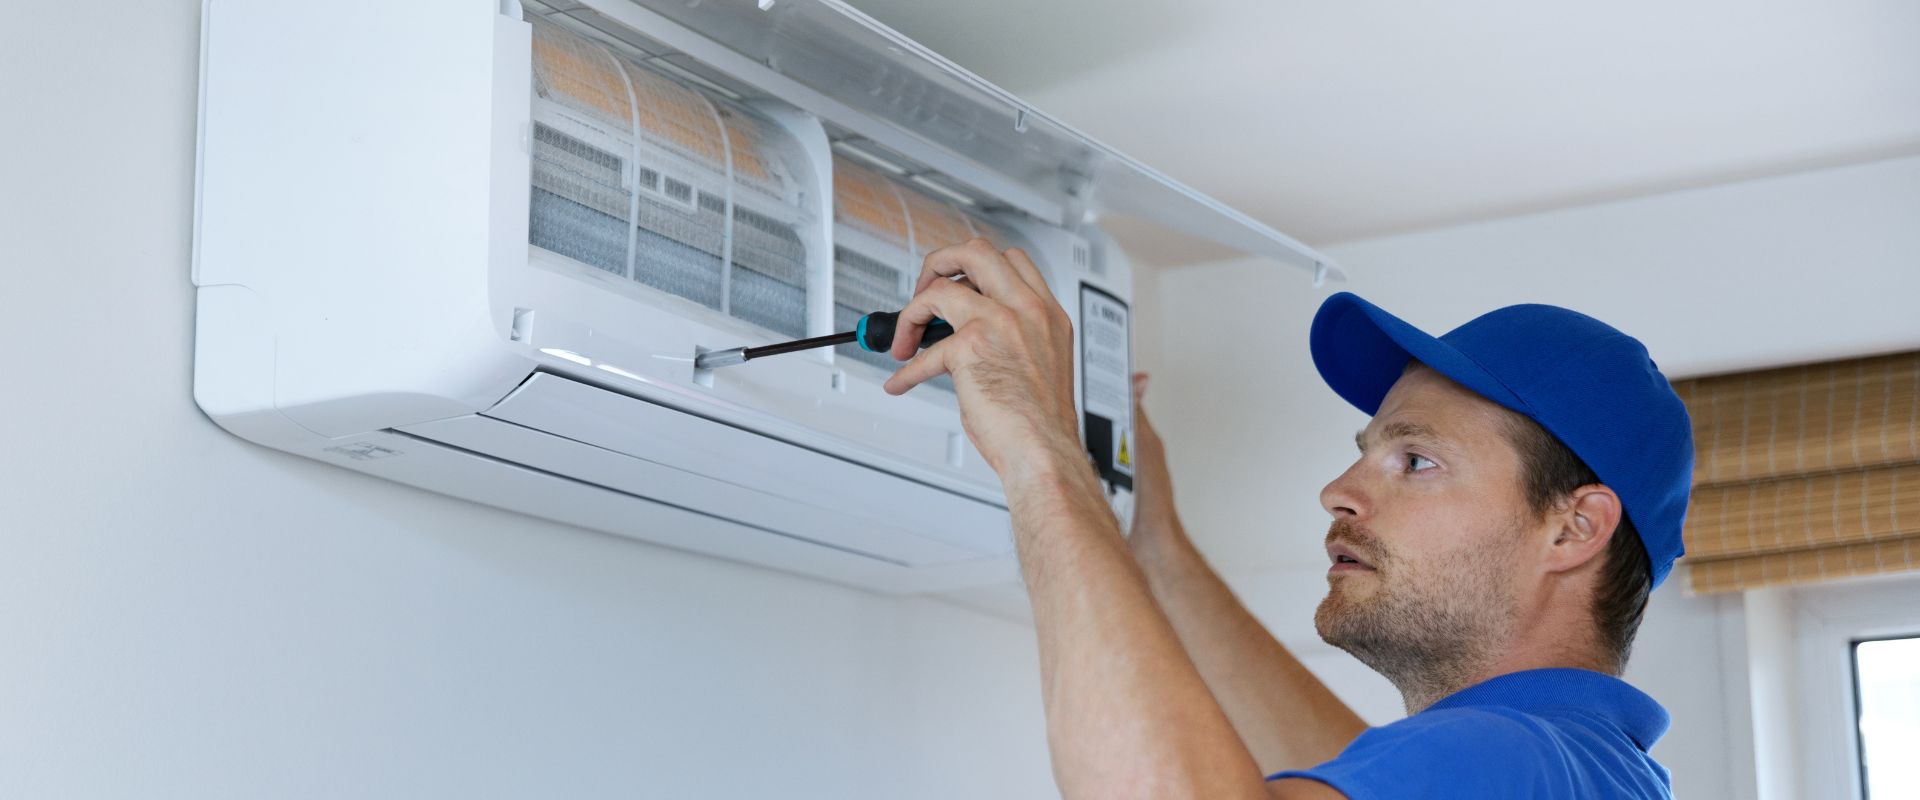 How to Find the Best HVAC Contractors in Ontario, Canada